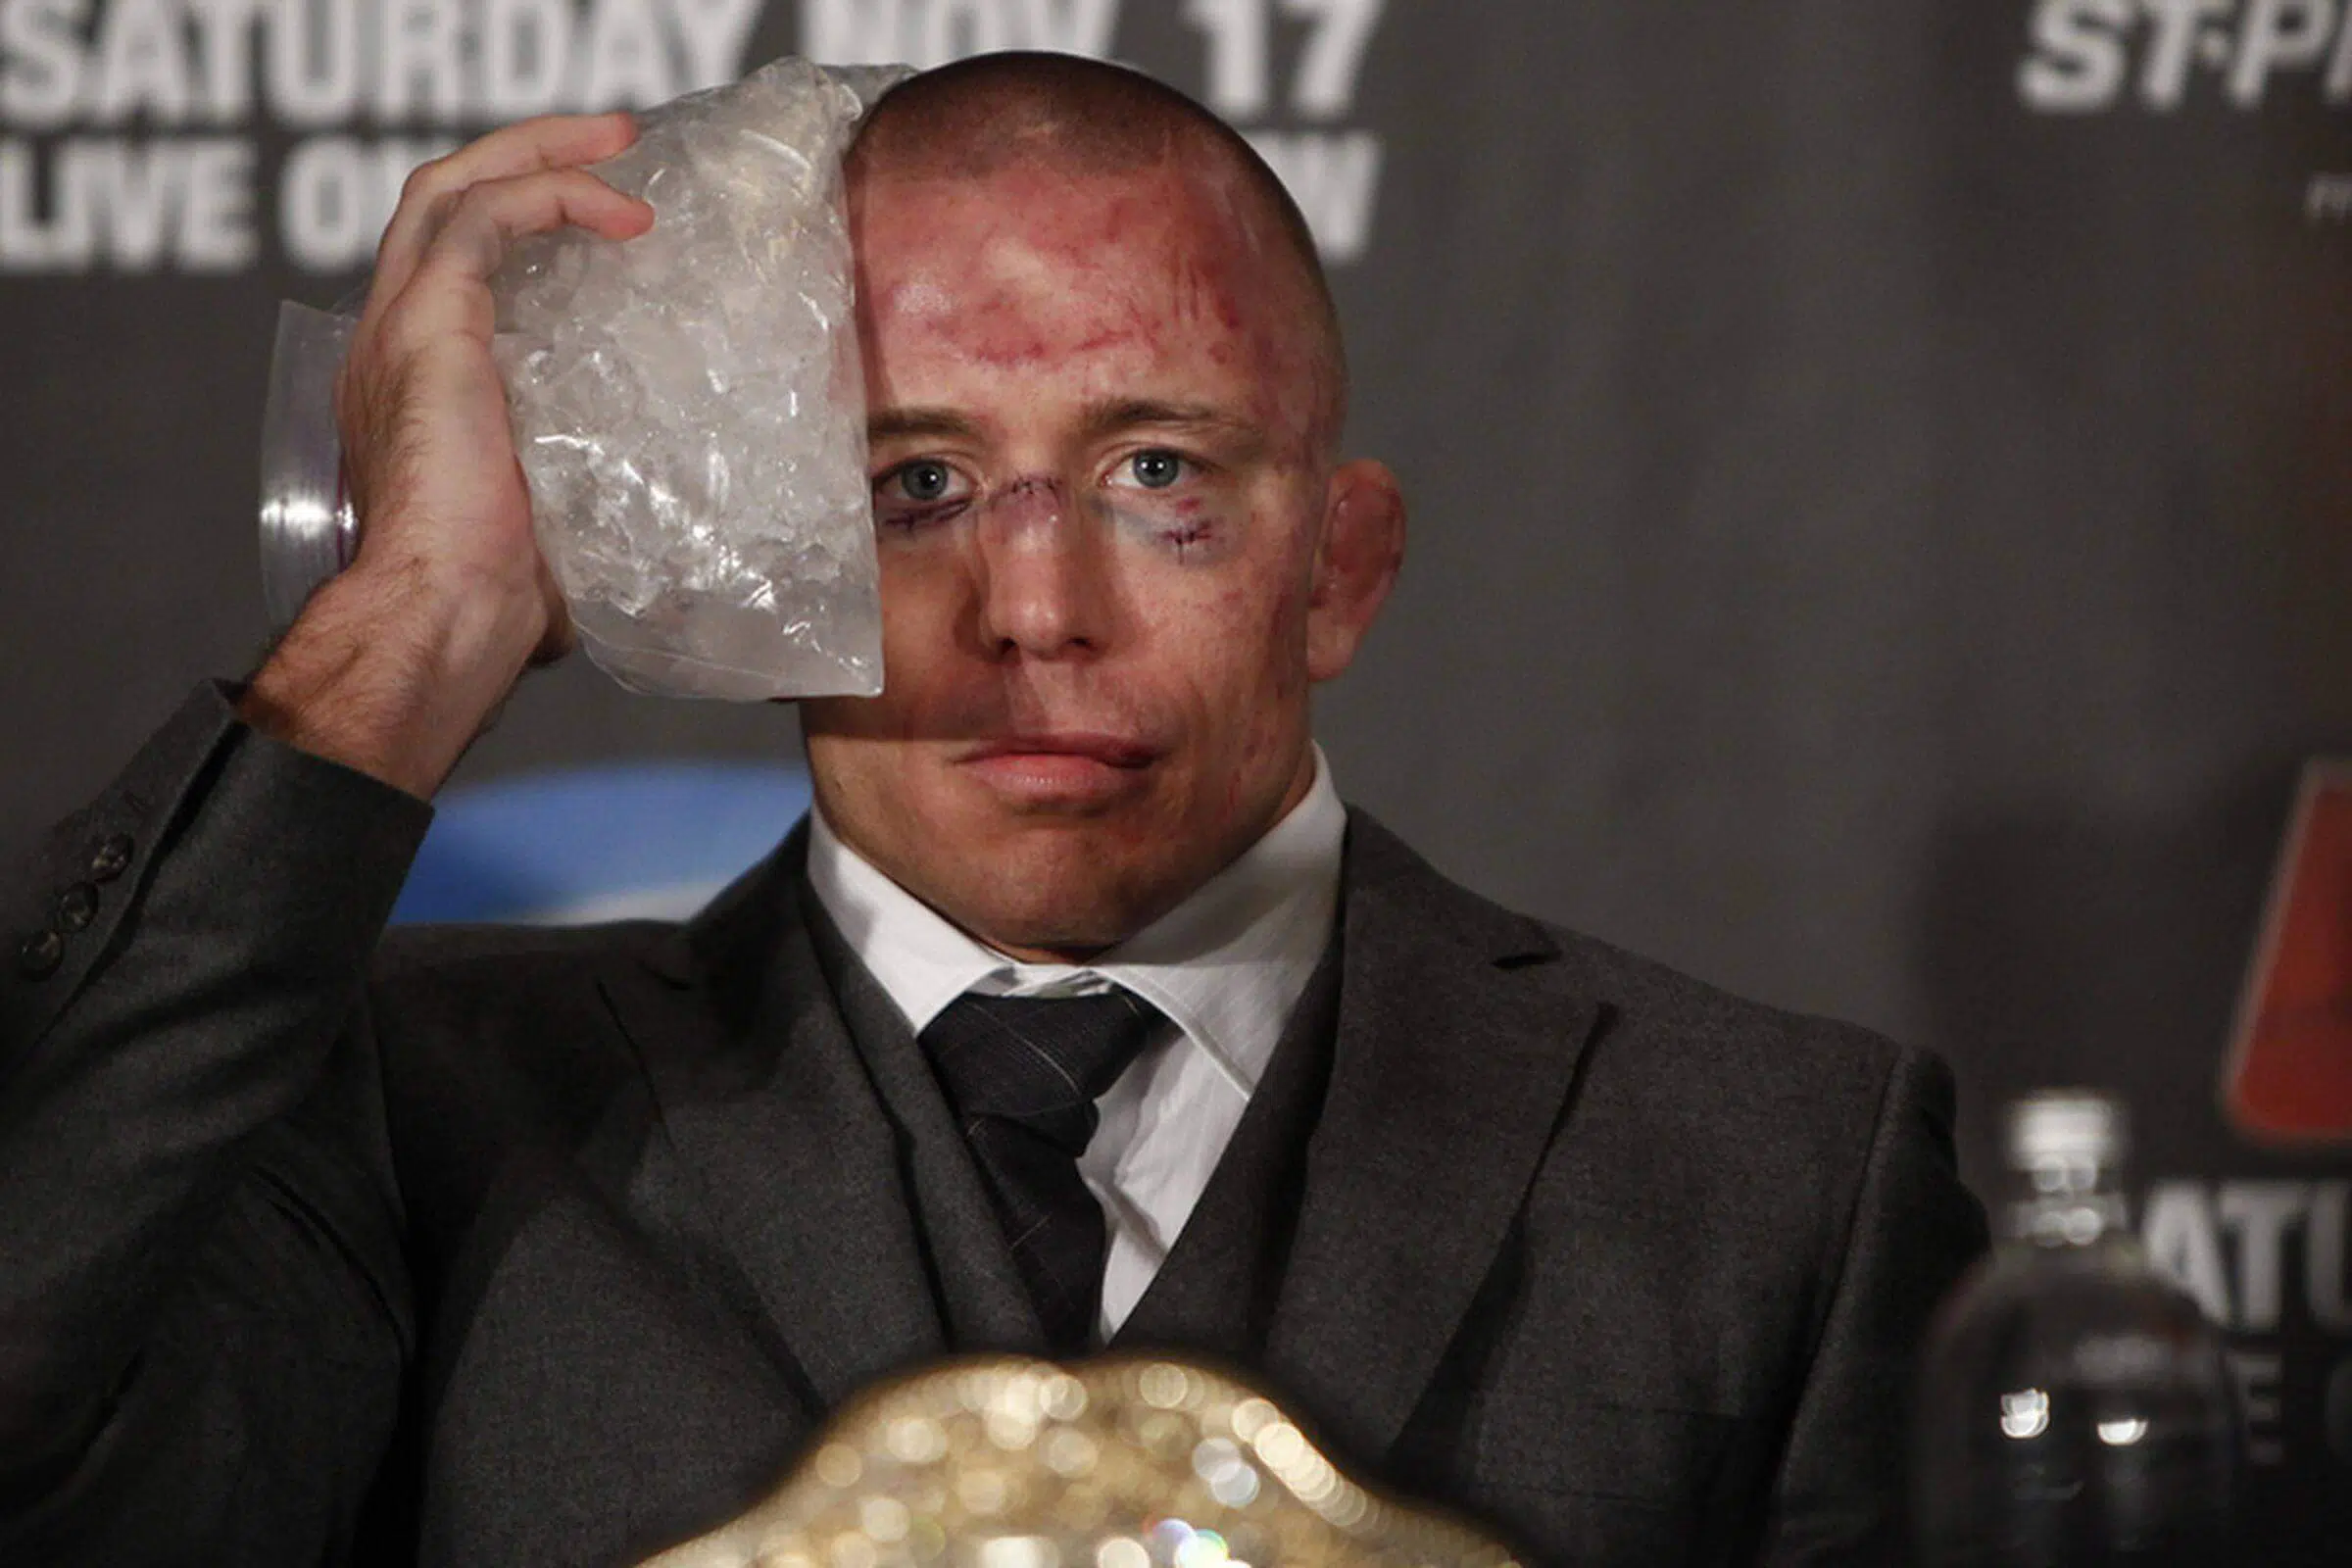 st. pierre ices face after ufc match